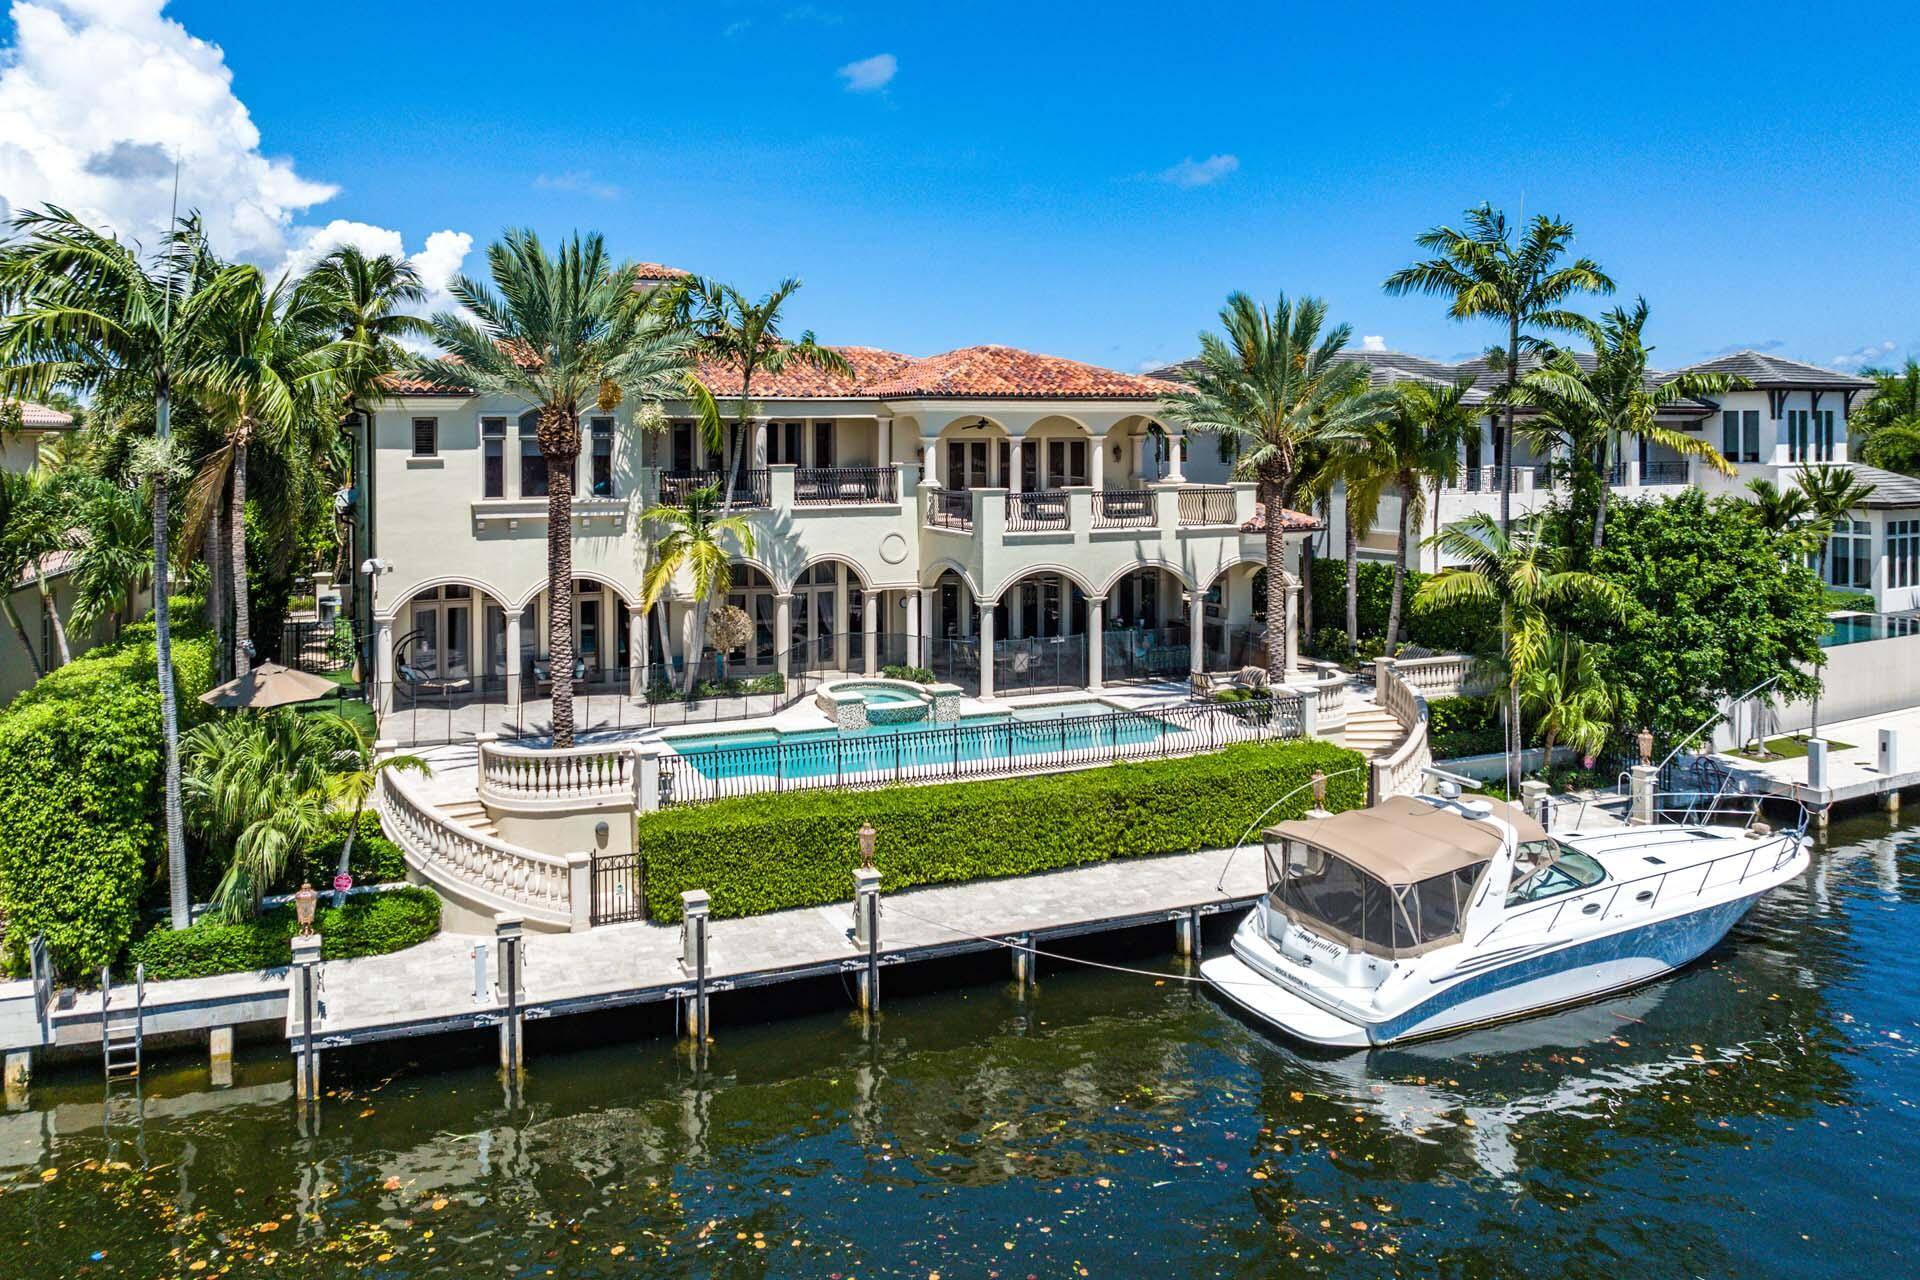 Casa Rosa is a grand waterfront estate located on 112' of the most expansive waterway in Royal Palm Yacht Country Club.